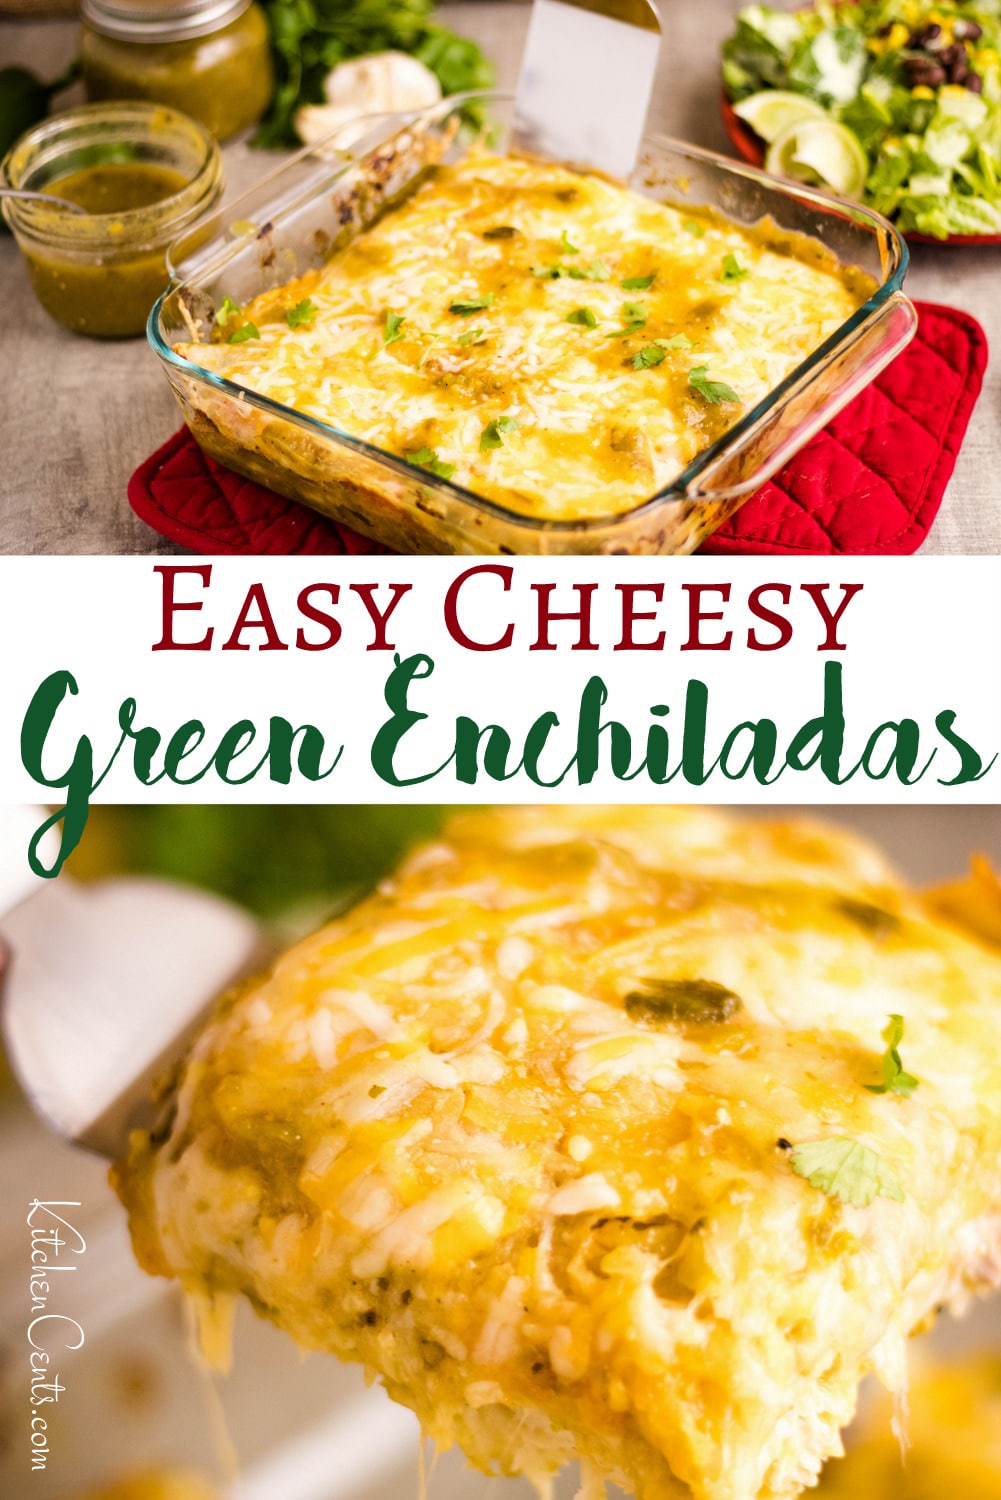 Easy Cheesy Green Enchiladas with Home Canned Sauce | Kitchen Cents